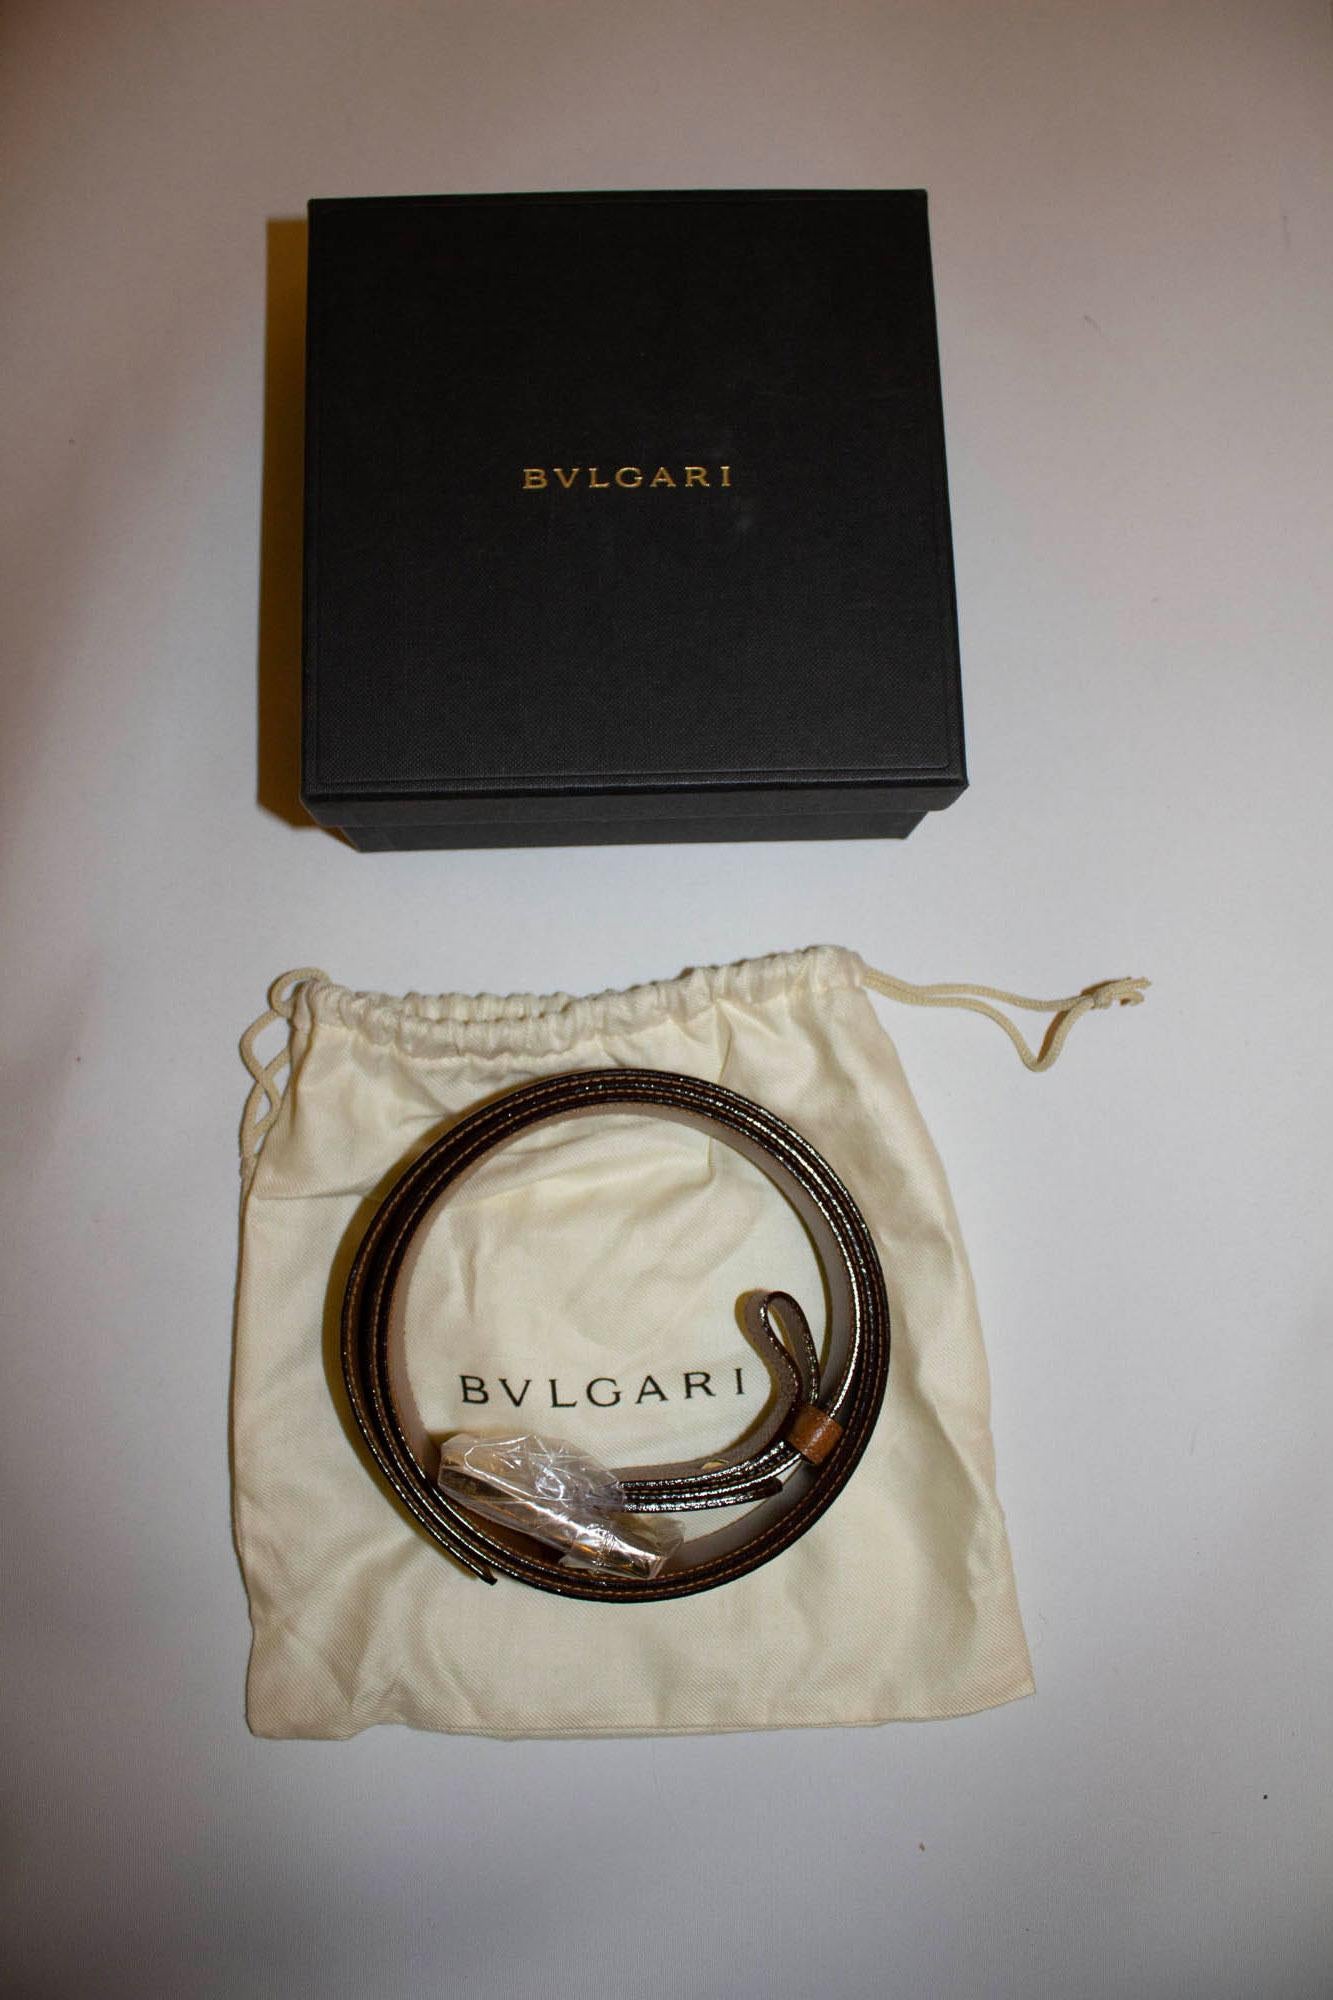 A wonderful leather belt by Bvlgari , unused with original box, and dust bag. The belt is in a textured leather with heavy gold buckle. Leather belt, length 45'', height 1 1/2''